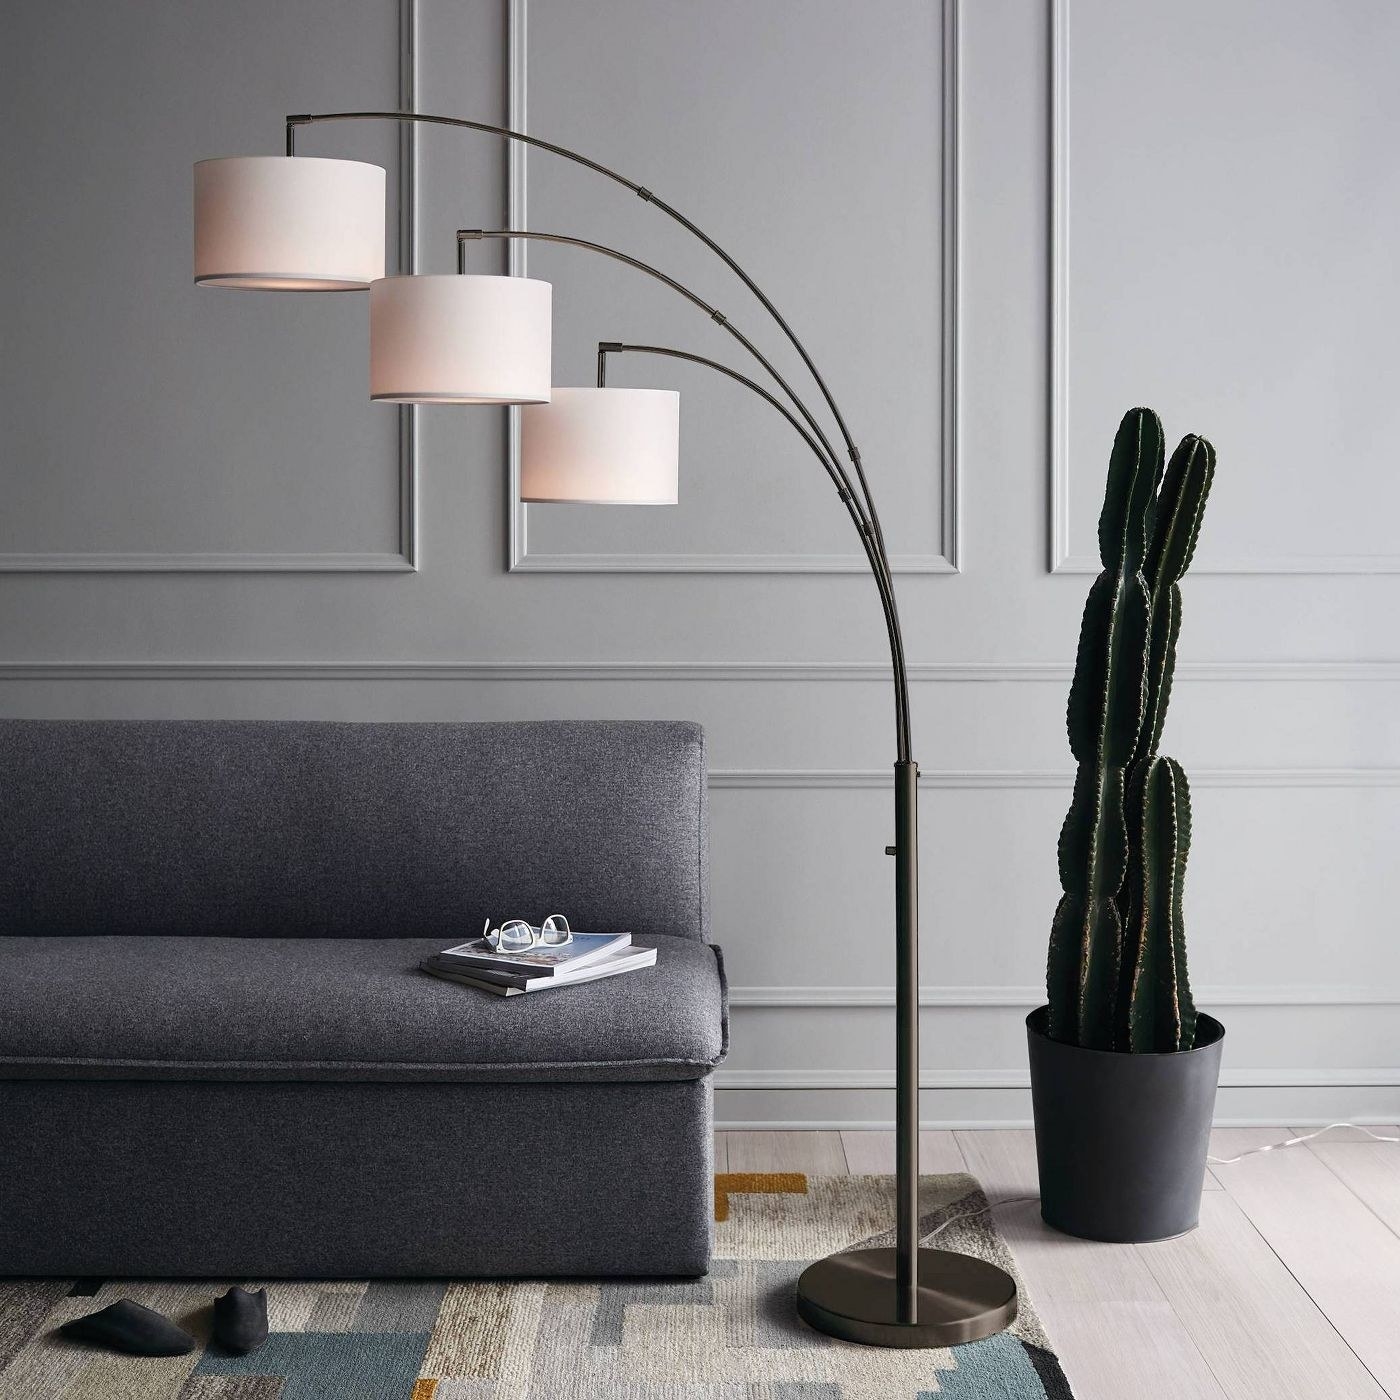 A three part shaded arc floor lamp next to a couch